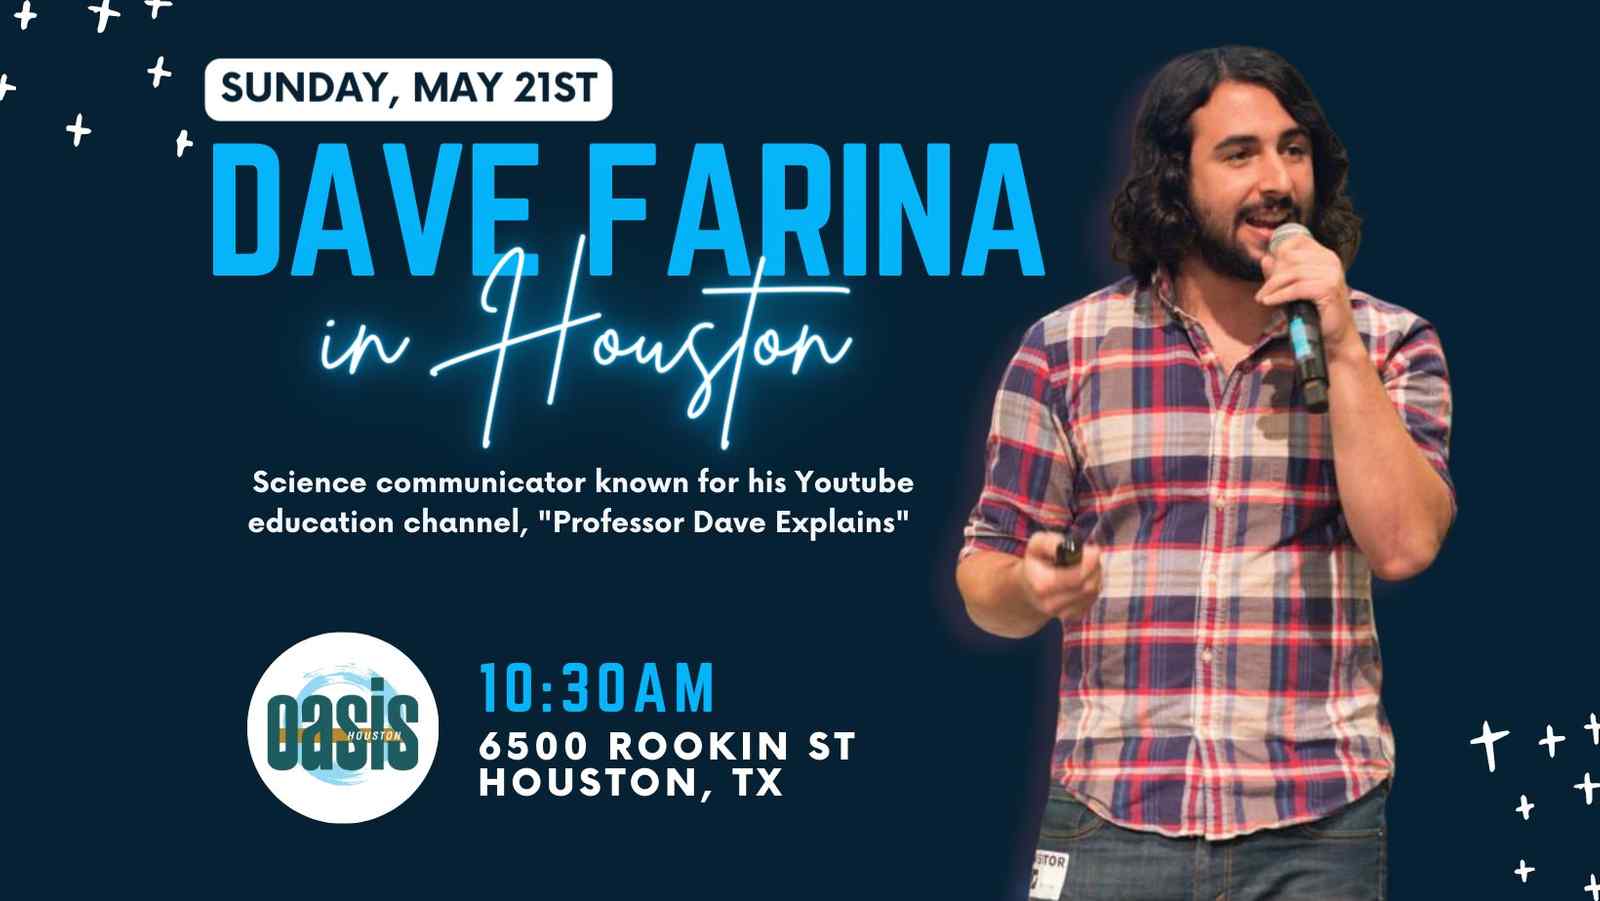 The Birth of the Science Communicator | Dave Farina | Weekly Sunday Gathering